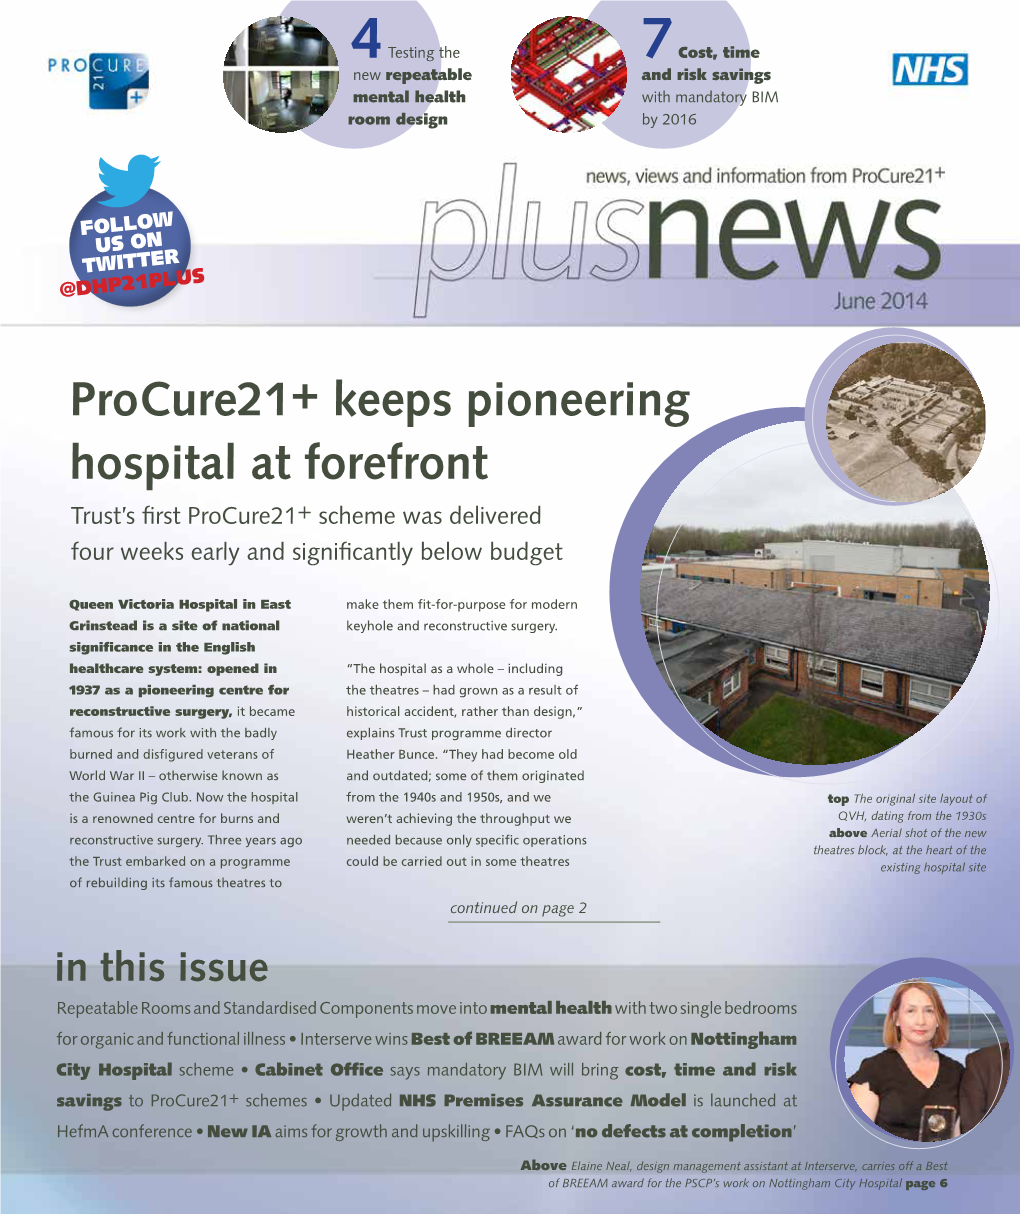 Procure21+ Keeps Pioneering Hospital at Forefront Trust’S First Procure21+ Scheme Was Delivered Four Weeks Early and Significantly Below Budget